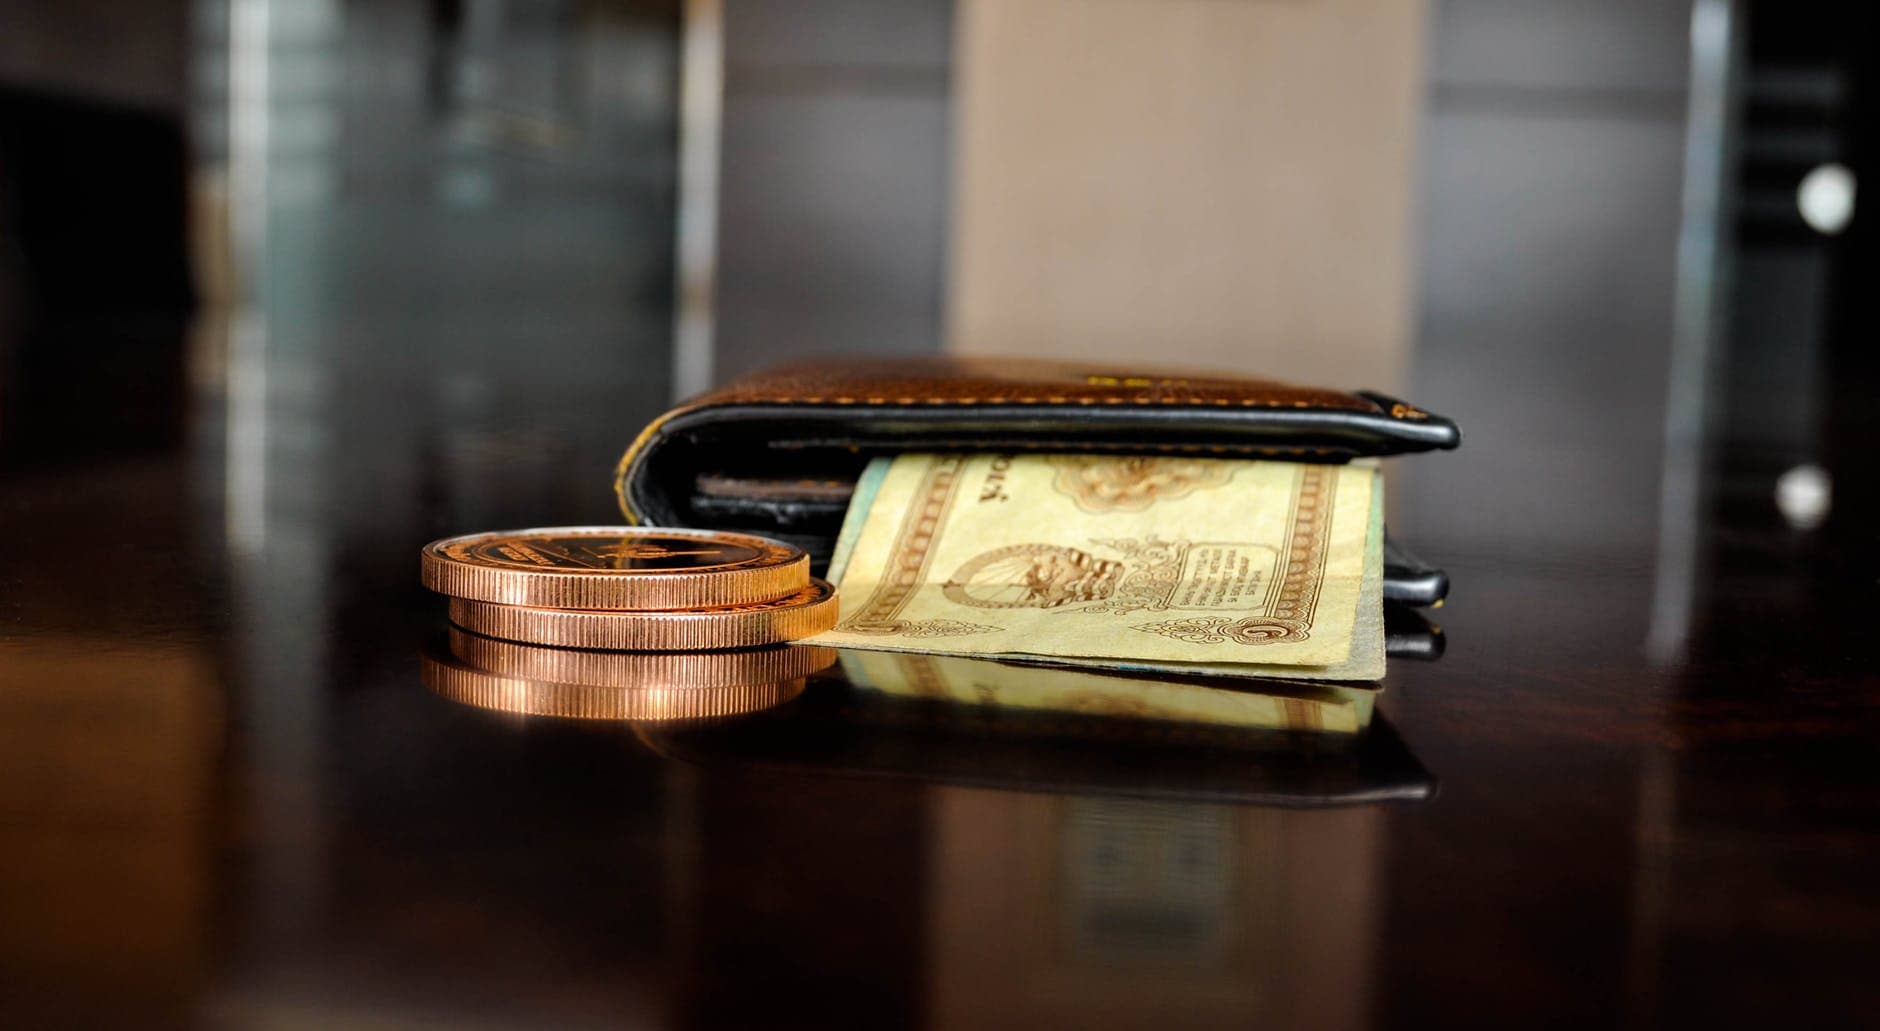 brown leather bifold wallet with banknotes sticking out